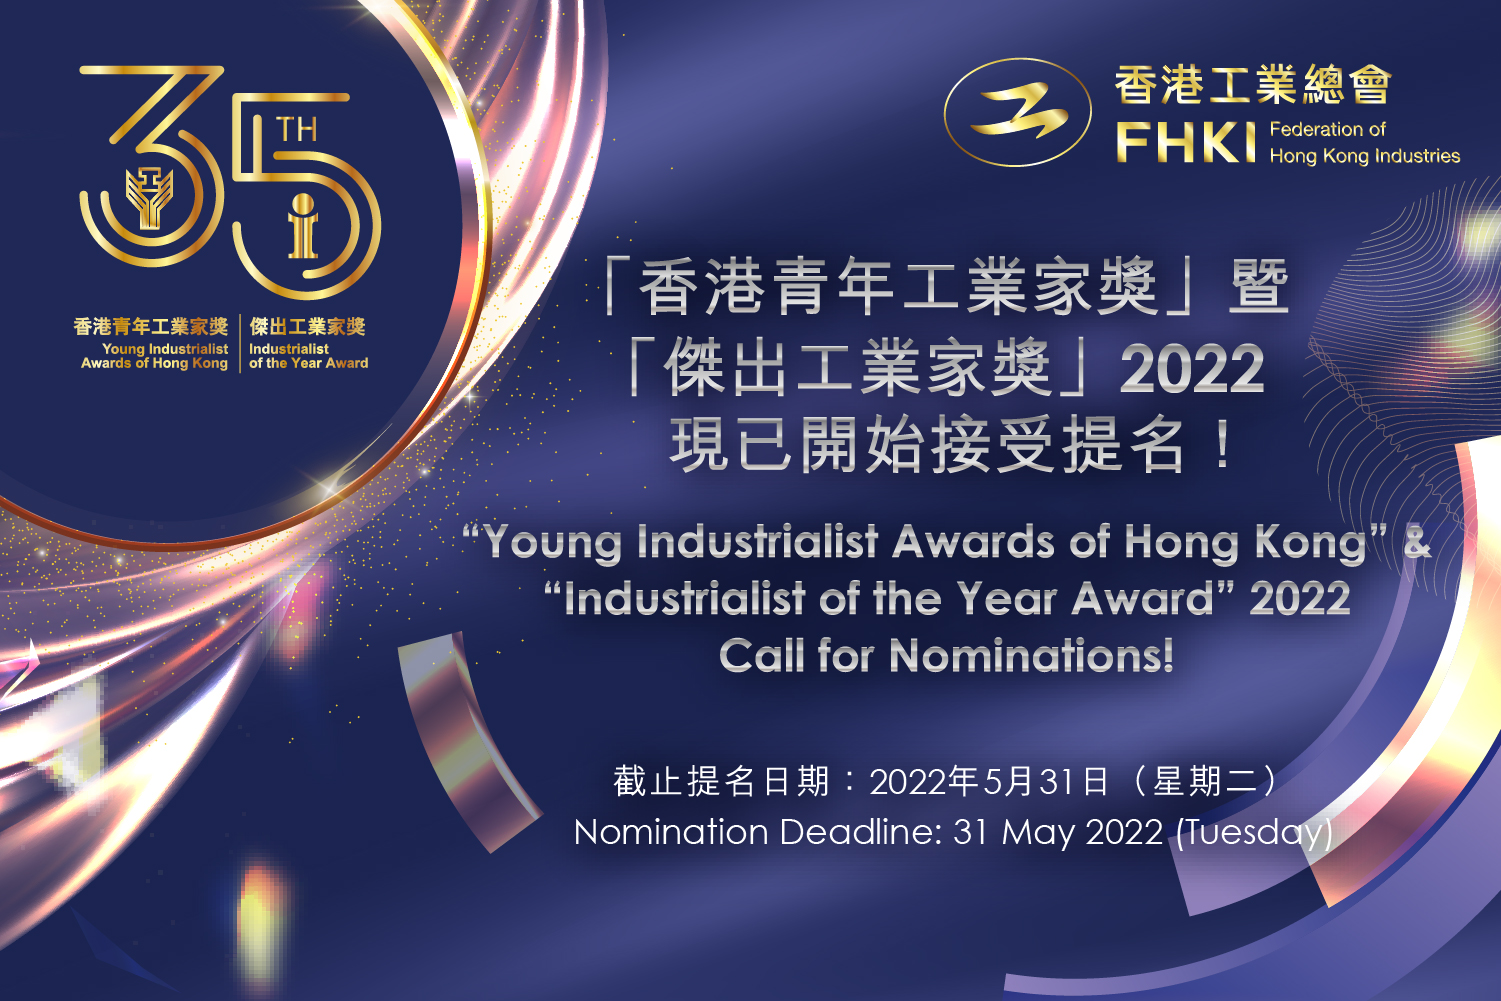 Supporting Event - “Young Industrialist Awards of Hong Kong” & “Industrialist of the Year Award” 2022